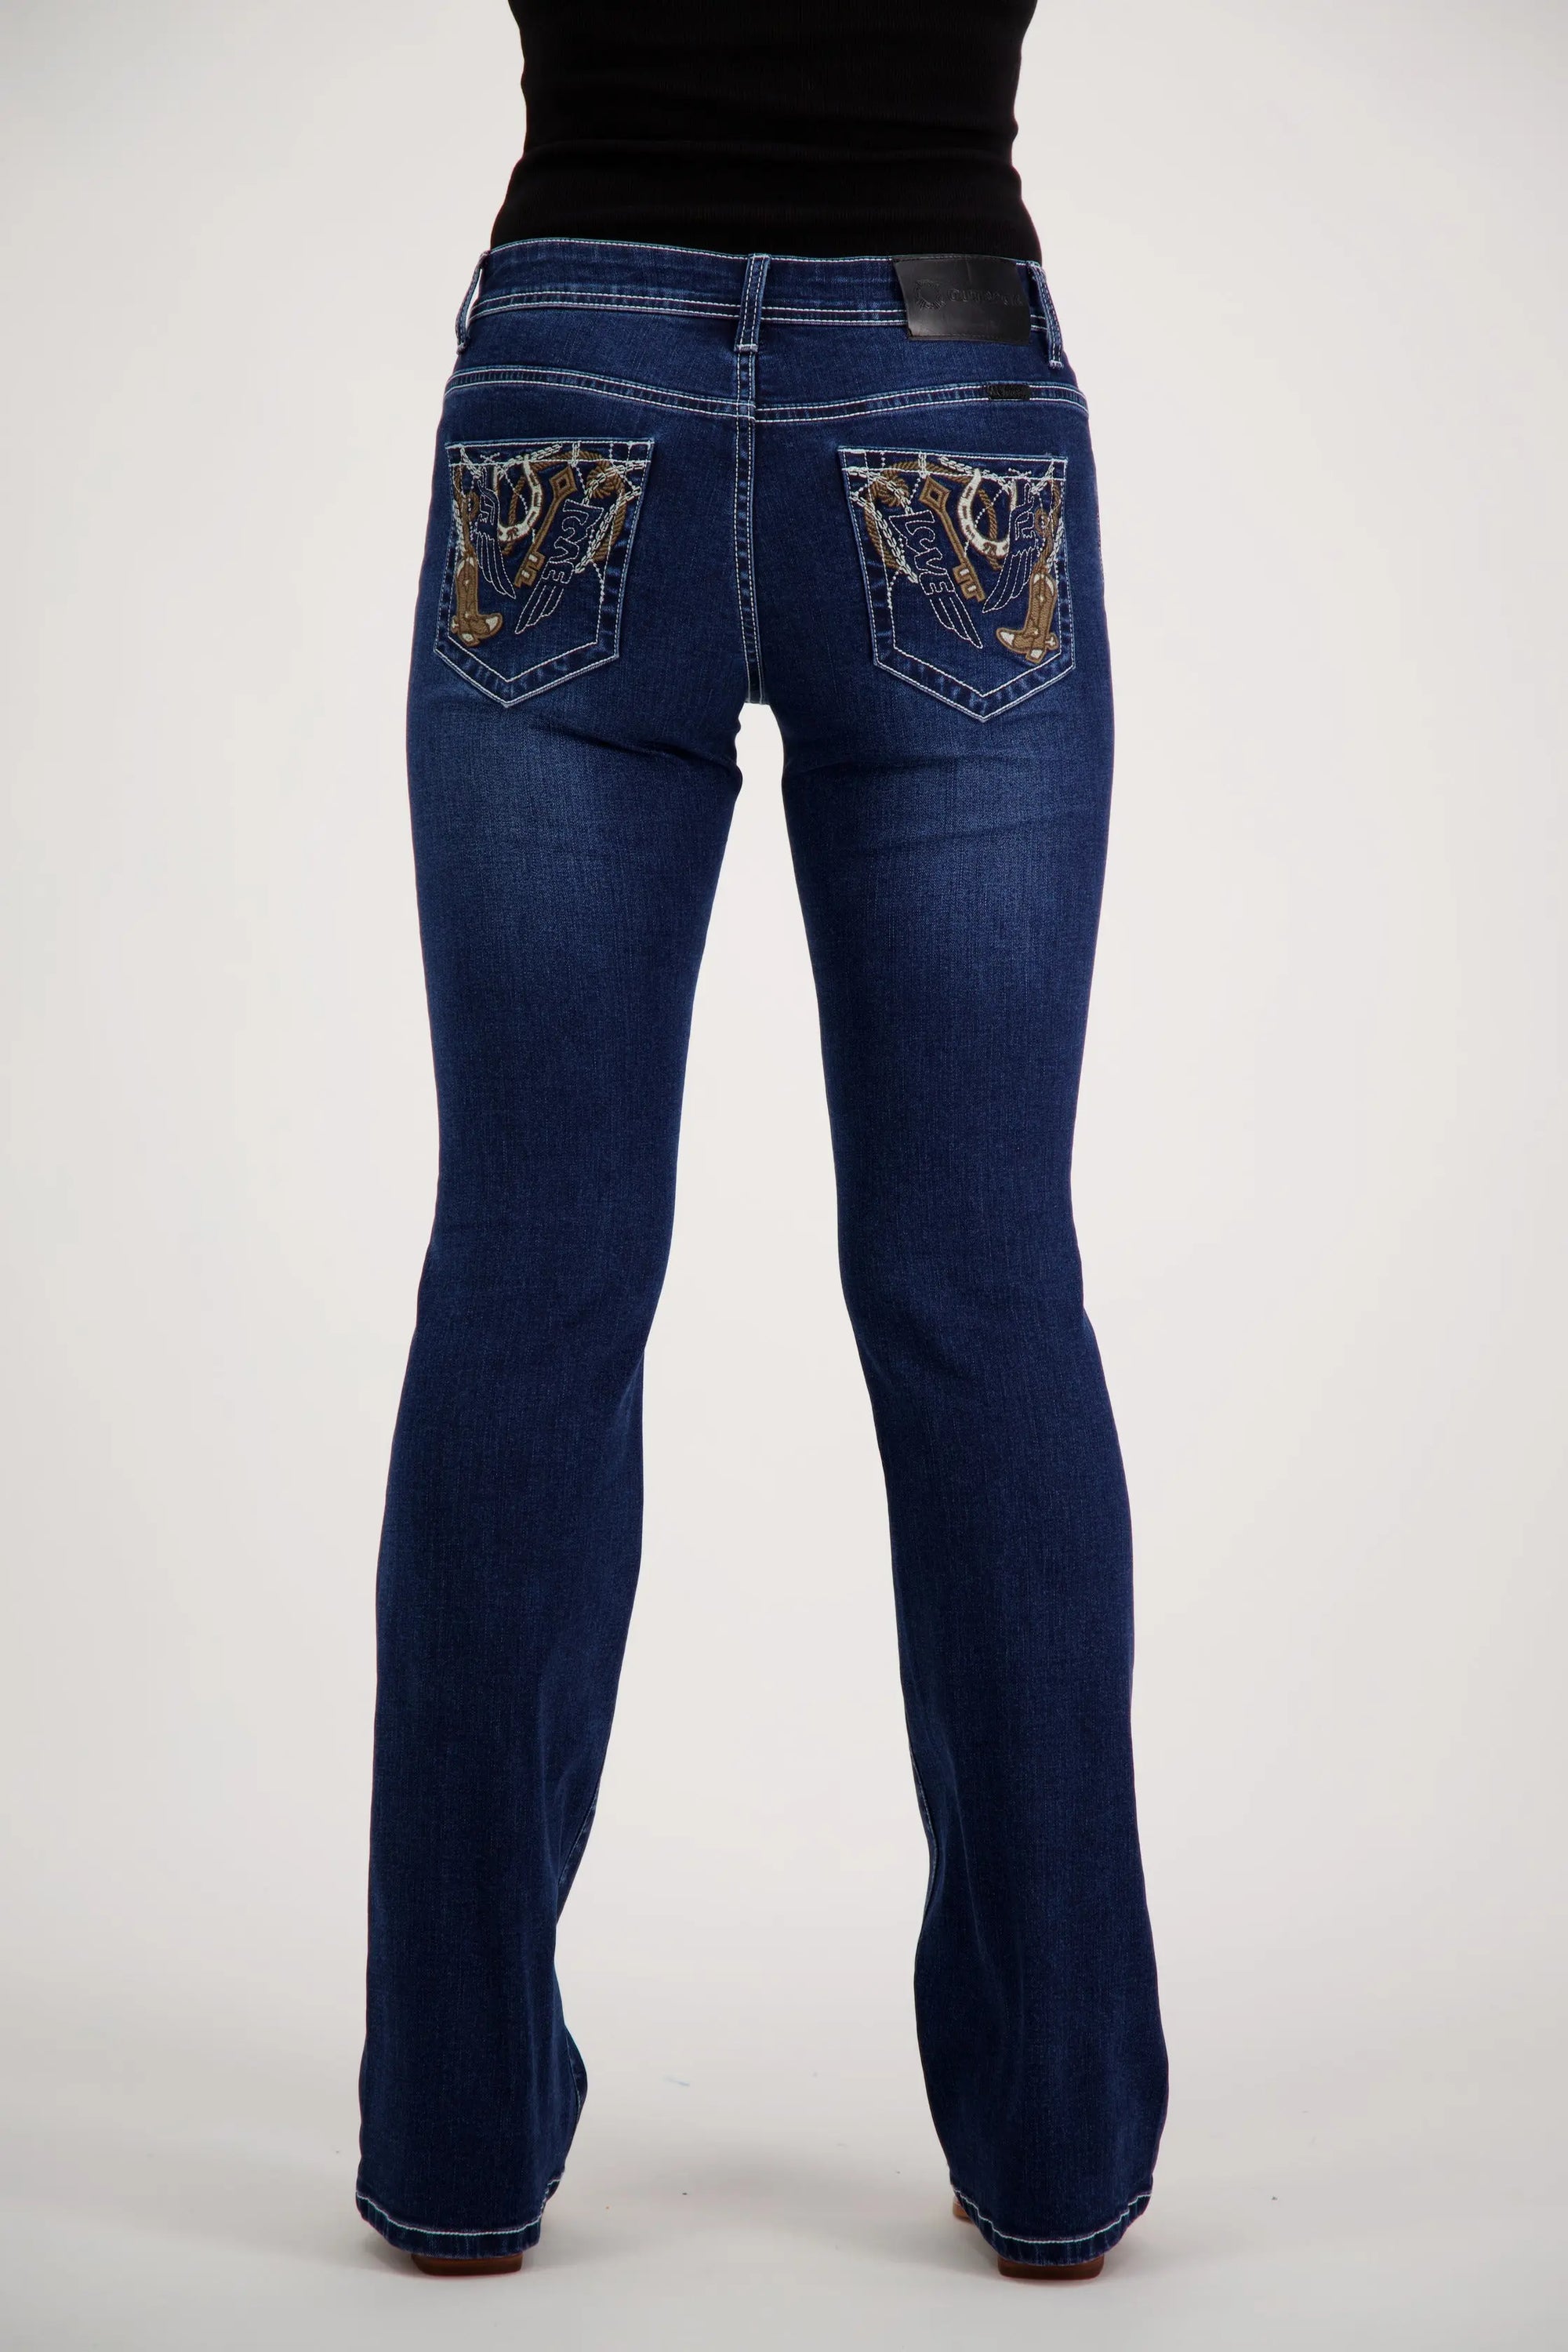 Hallie Bootcut Premium Stretch Denim Bling Jeans Outback Supply Co